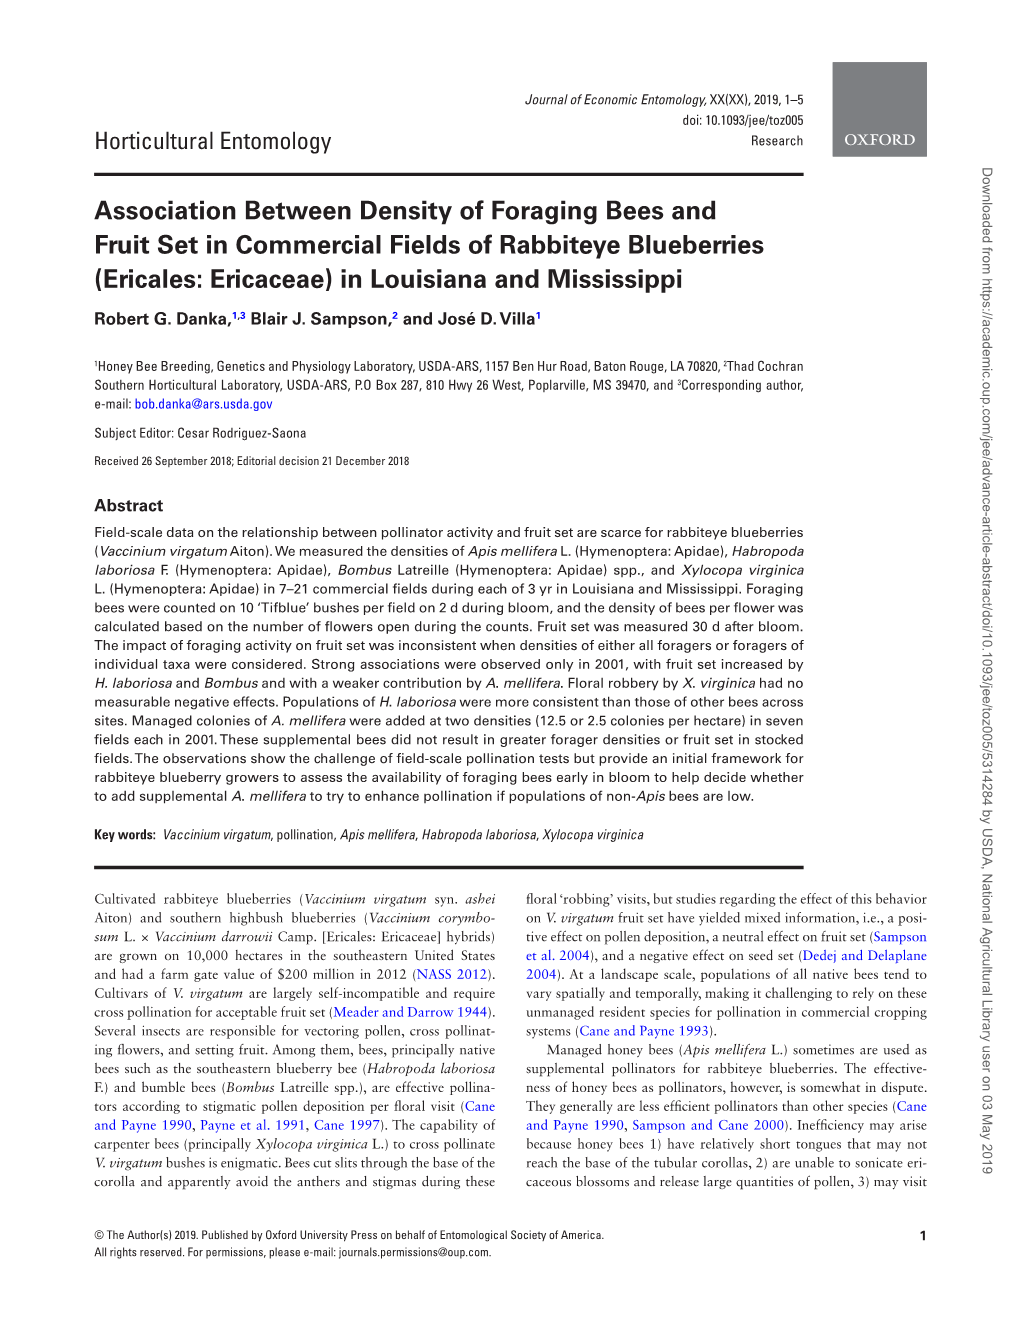 Association Between Density of Foraging Bees and Fruit Set in Commercial Fields of Rabbiteye Blueberries (Ericales: Ericaceae) in Louisiana and Mississippi